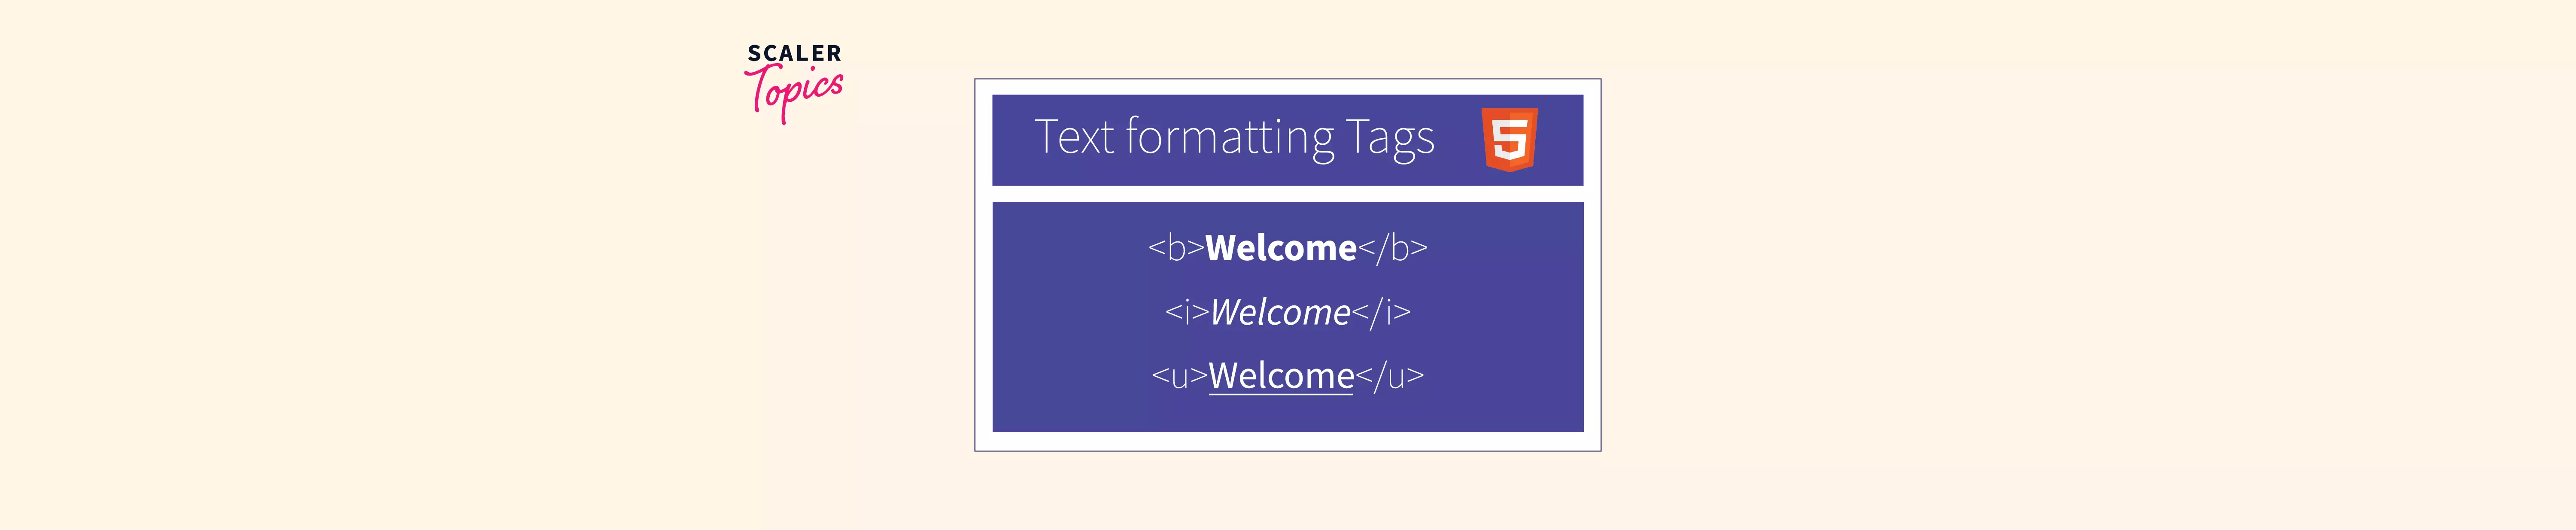 text-formatting-tags-in-html-scaler-topics